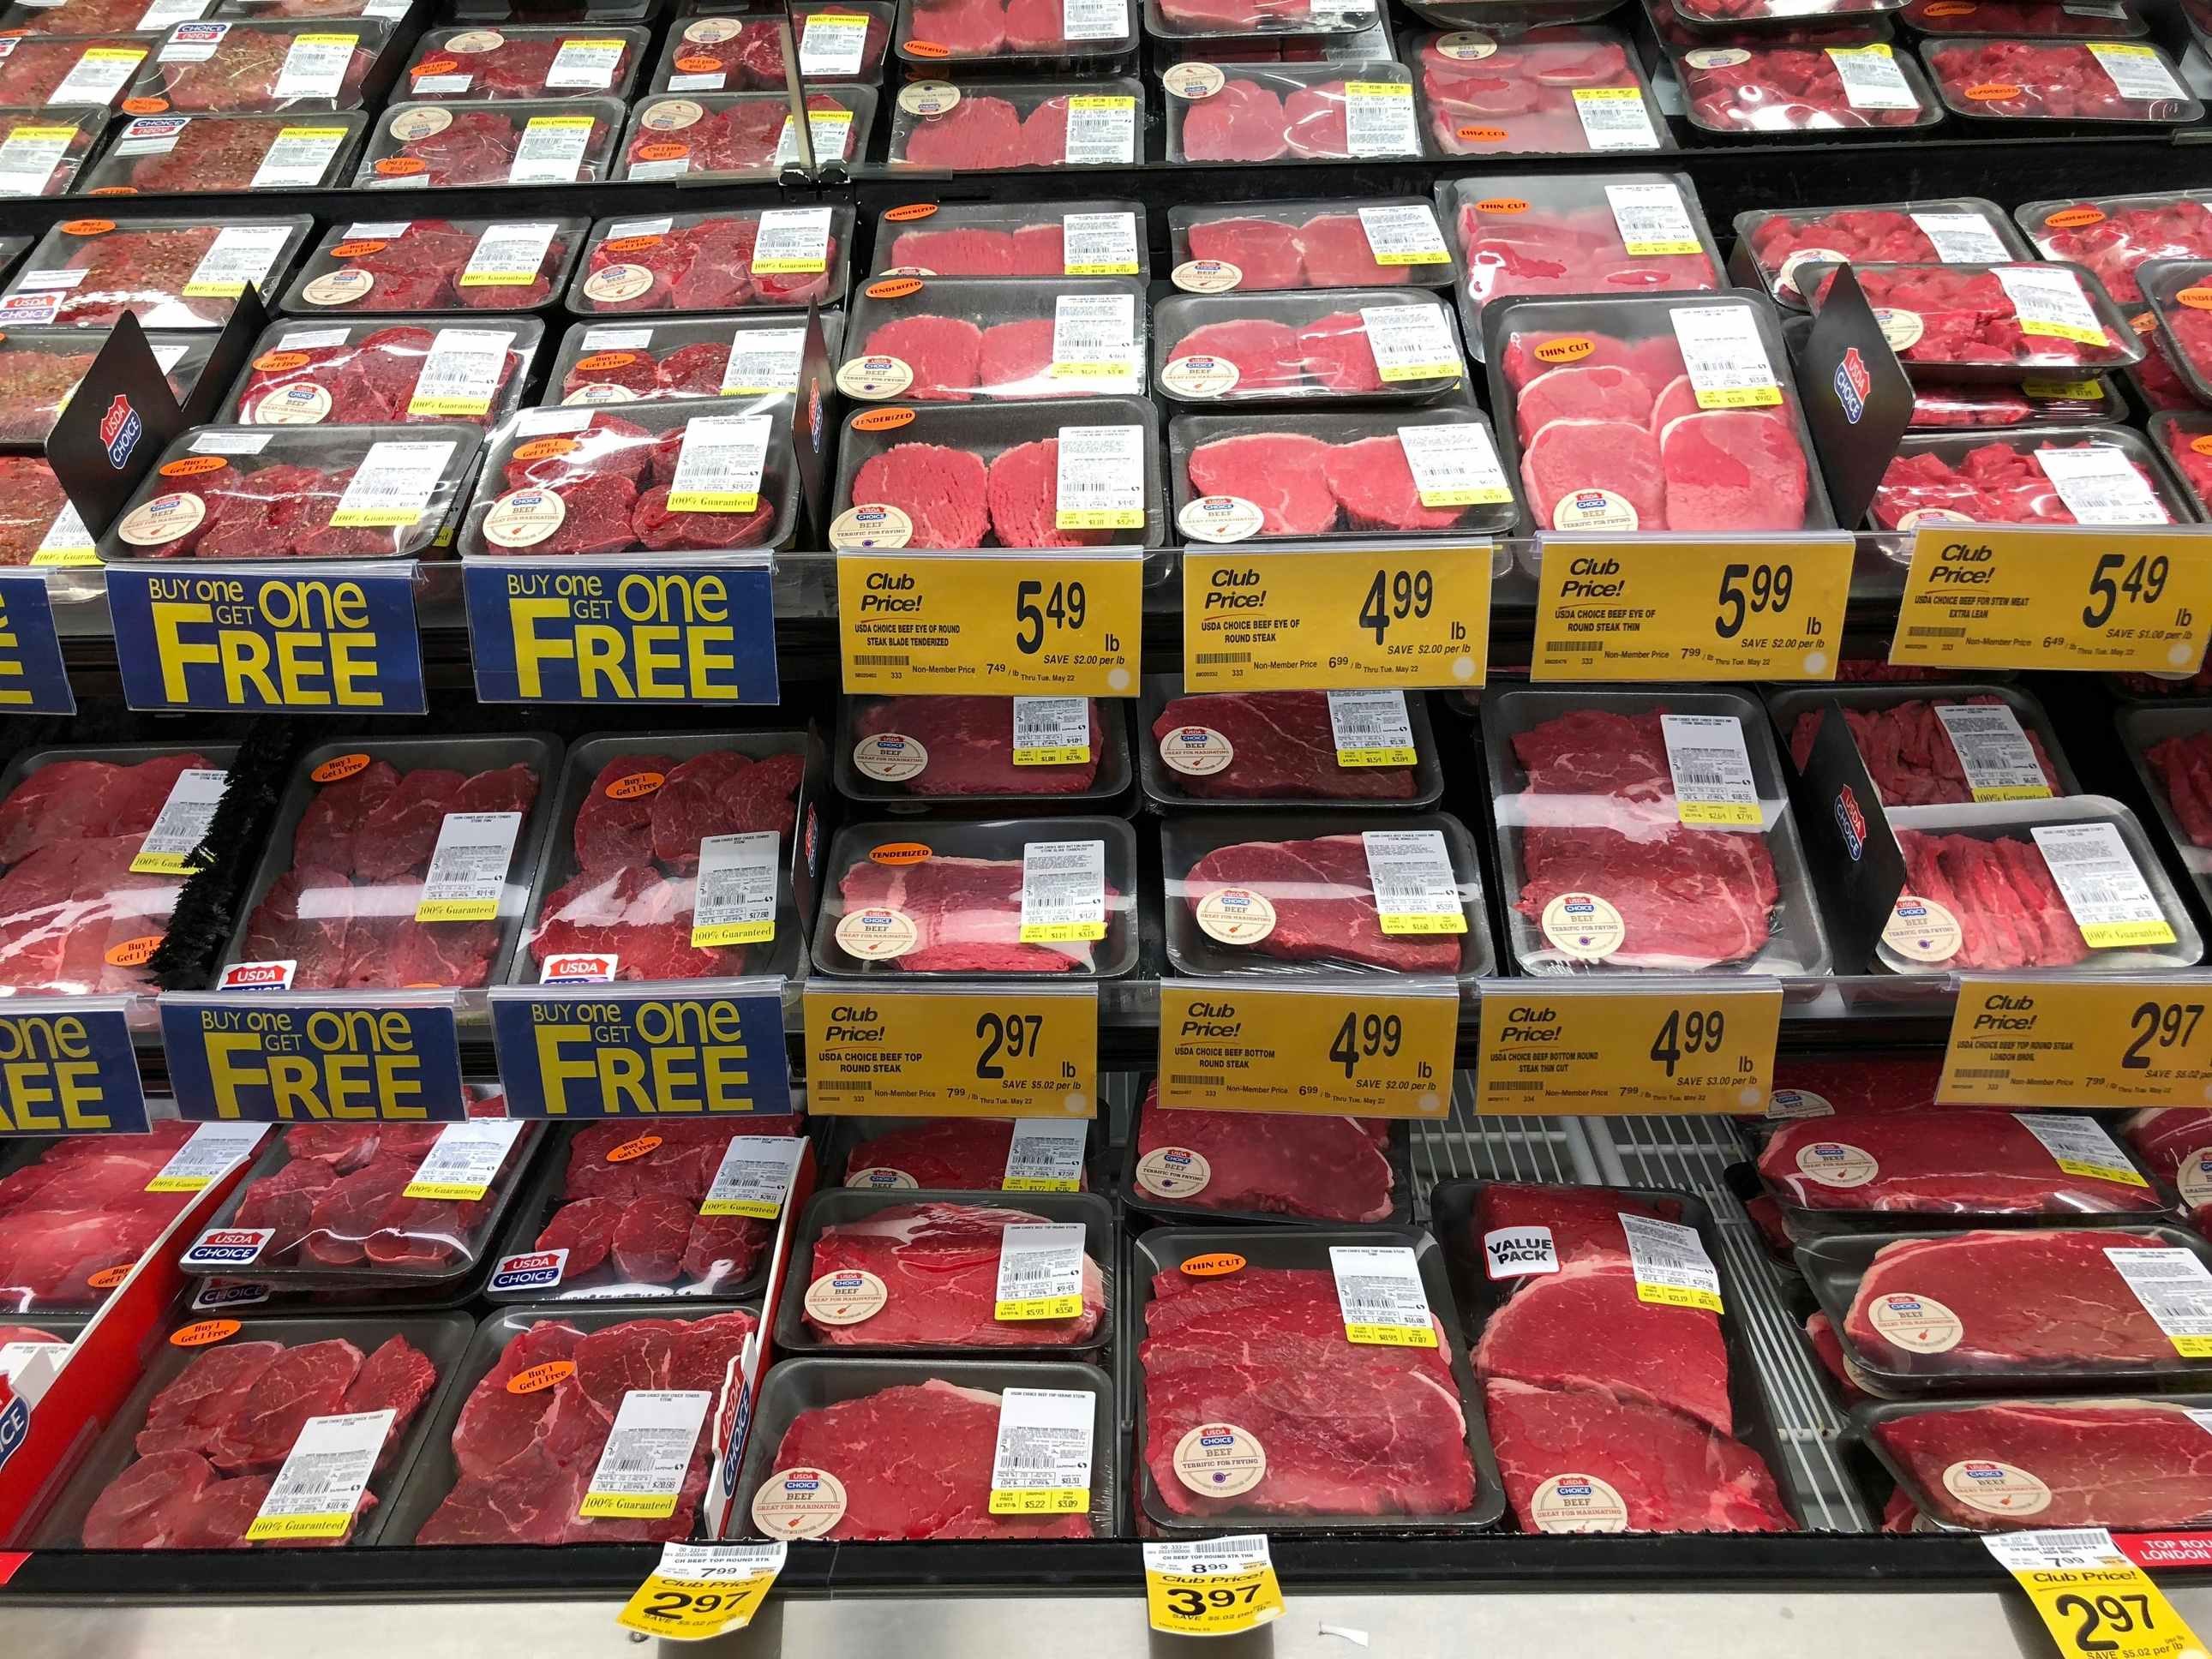 A photo showing some selections of good cuts of beef meat packed neatly in plastic trays, ready for cooking.